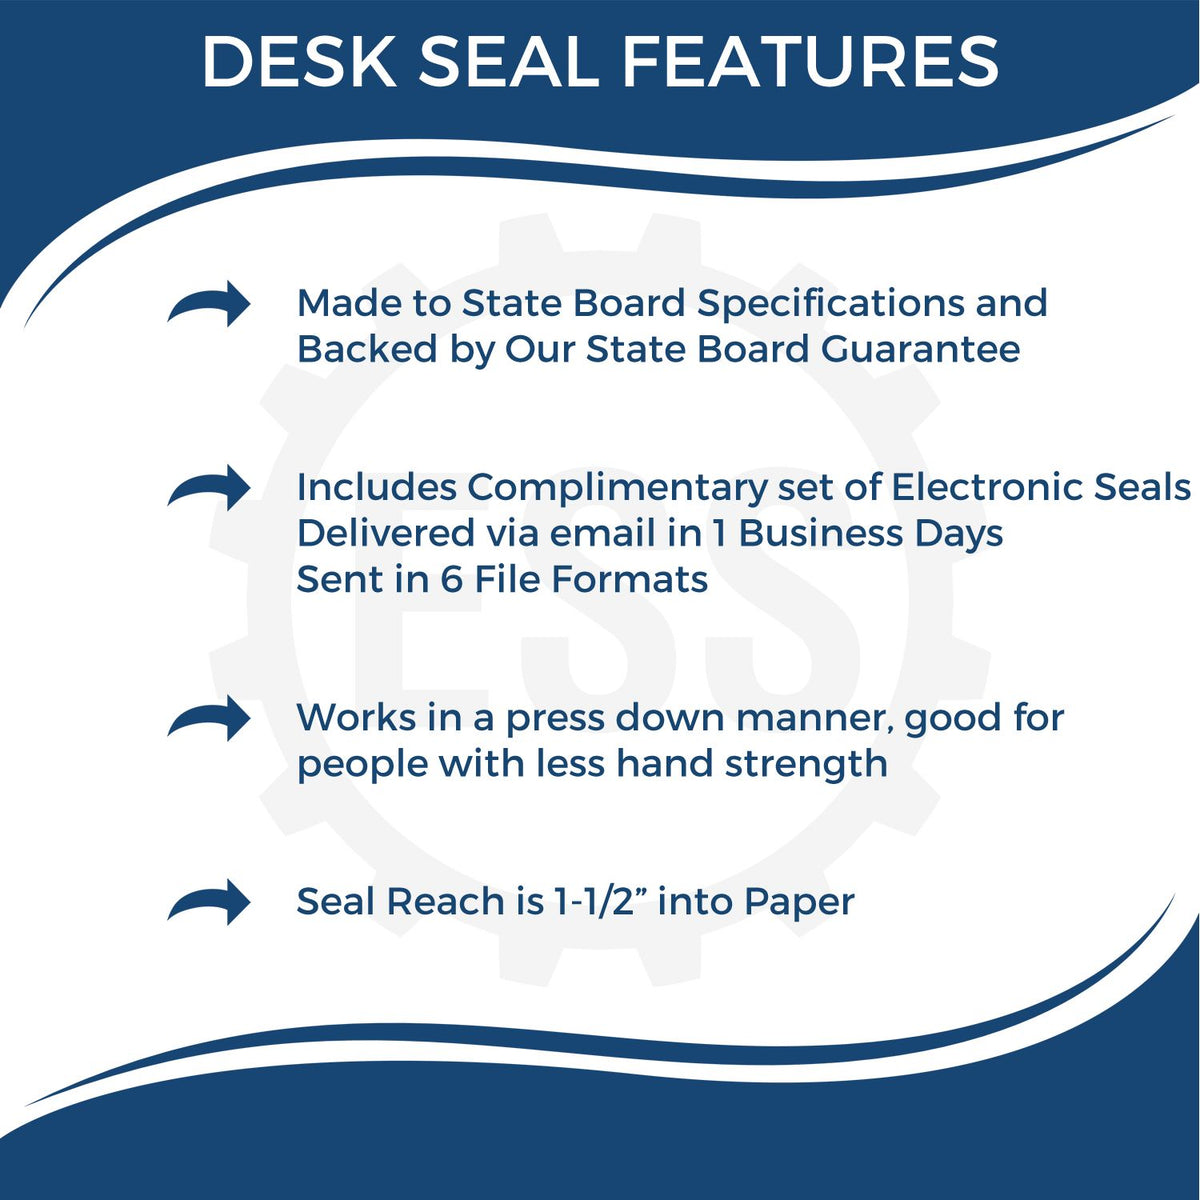 A picture of an infographic highlighting the selling points for the Nebraska Desk Surveyor Seal Embosser